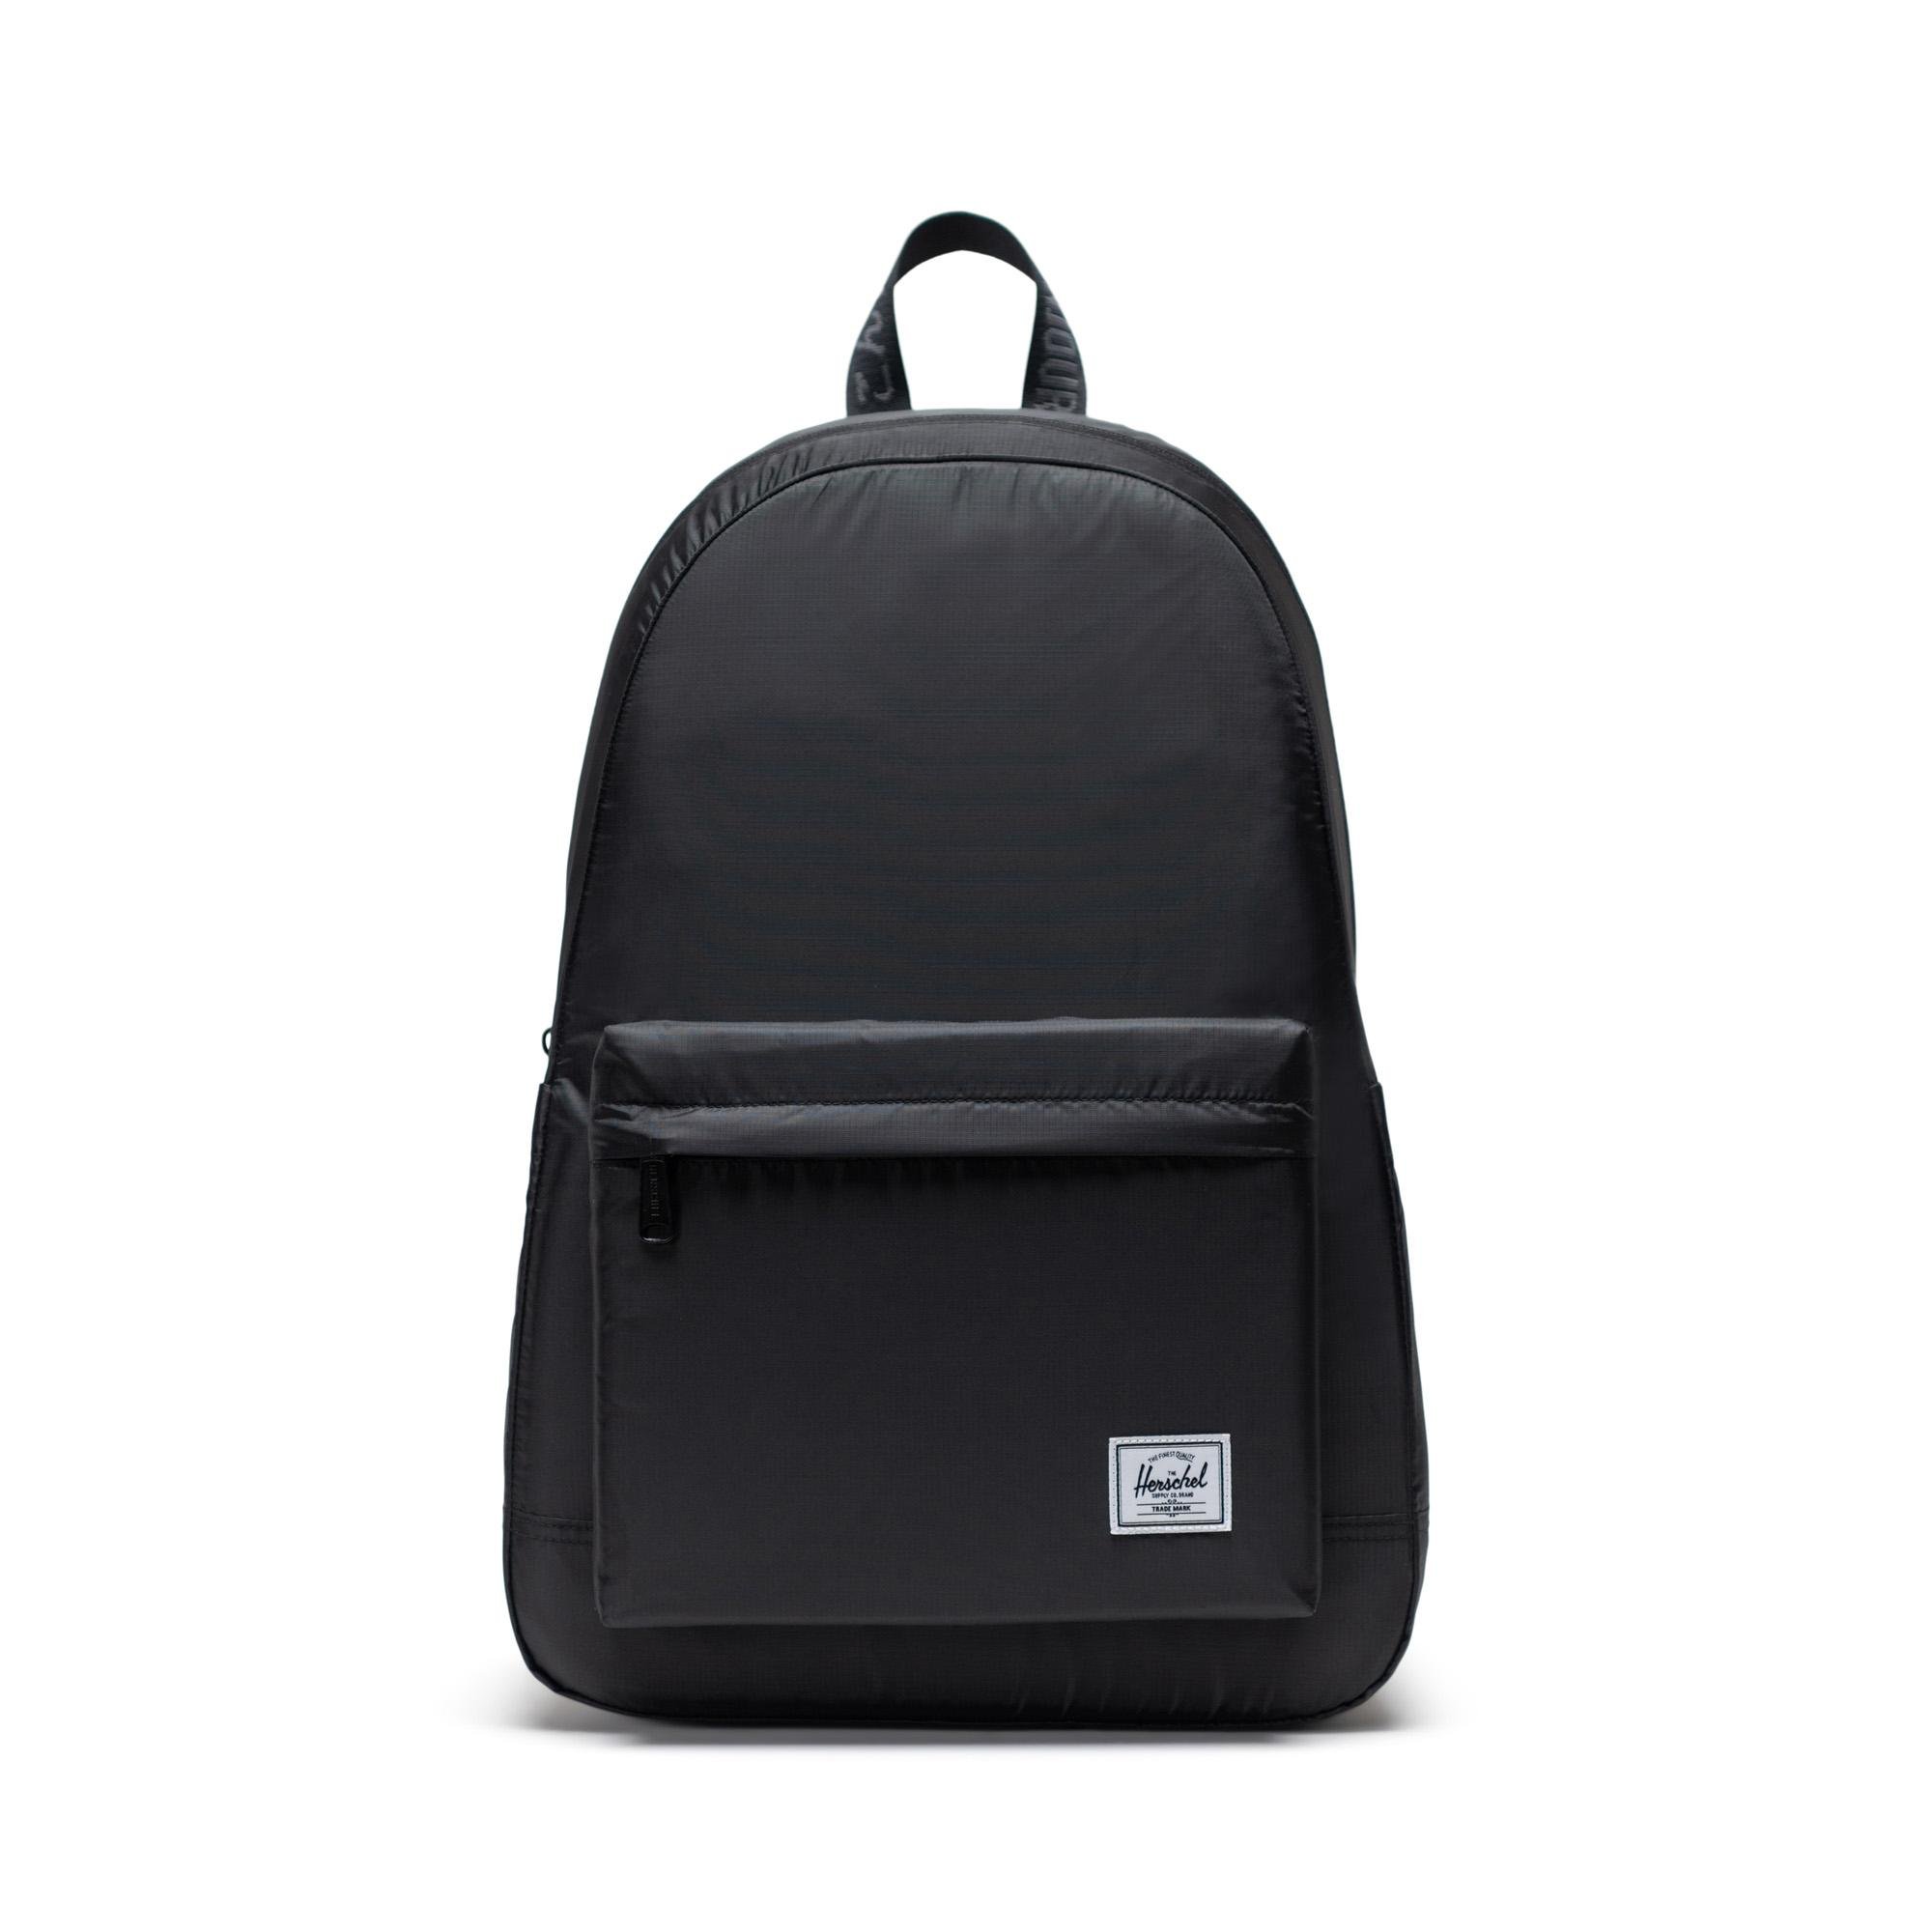 Rome Packable Backpack - 21.3L by HERSCHEL SUPPLY CO